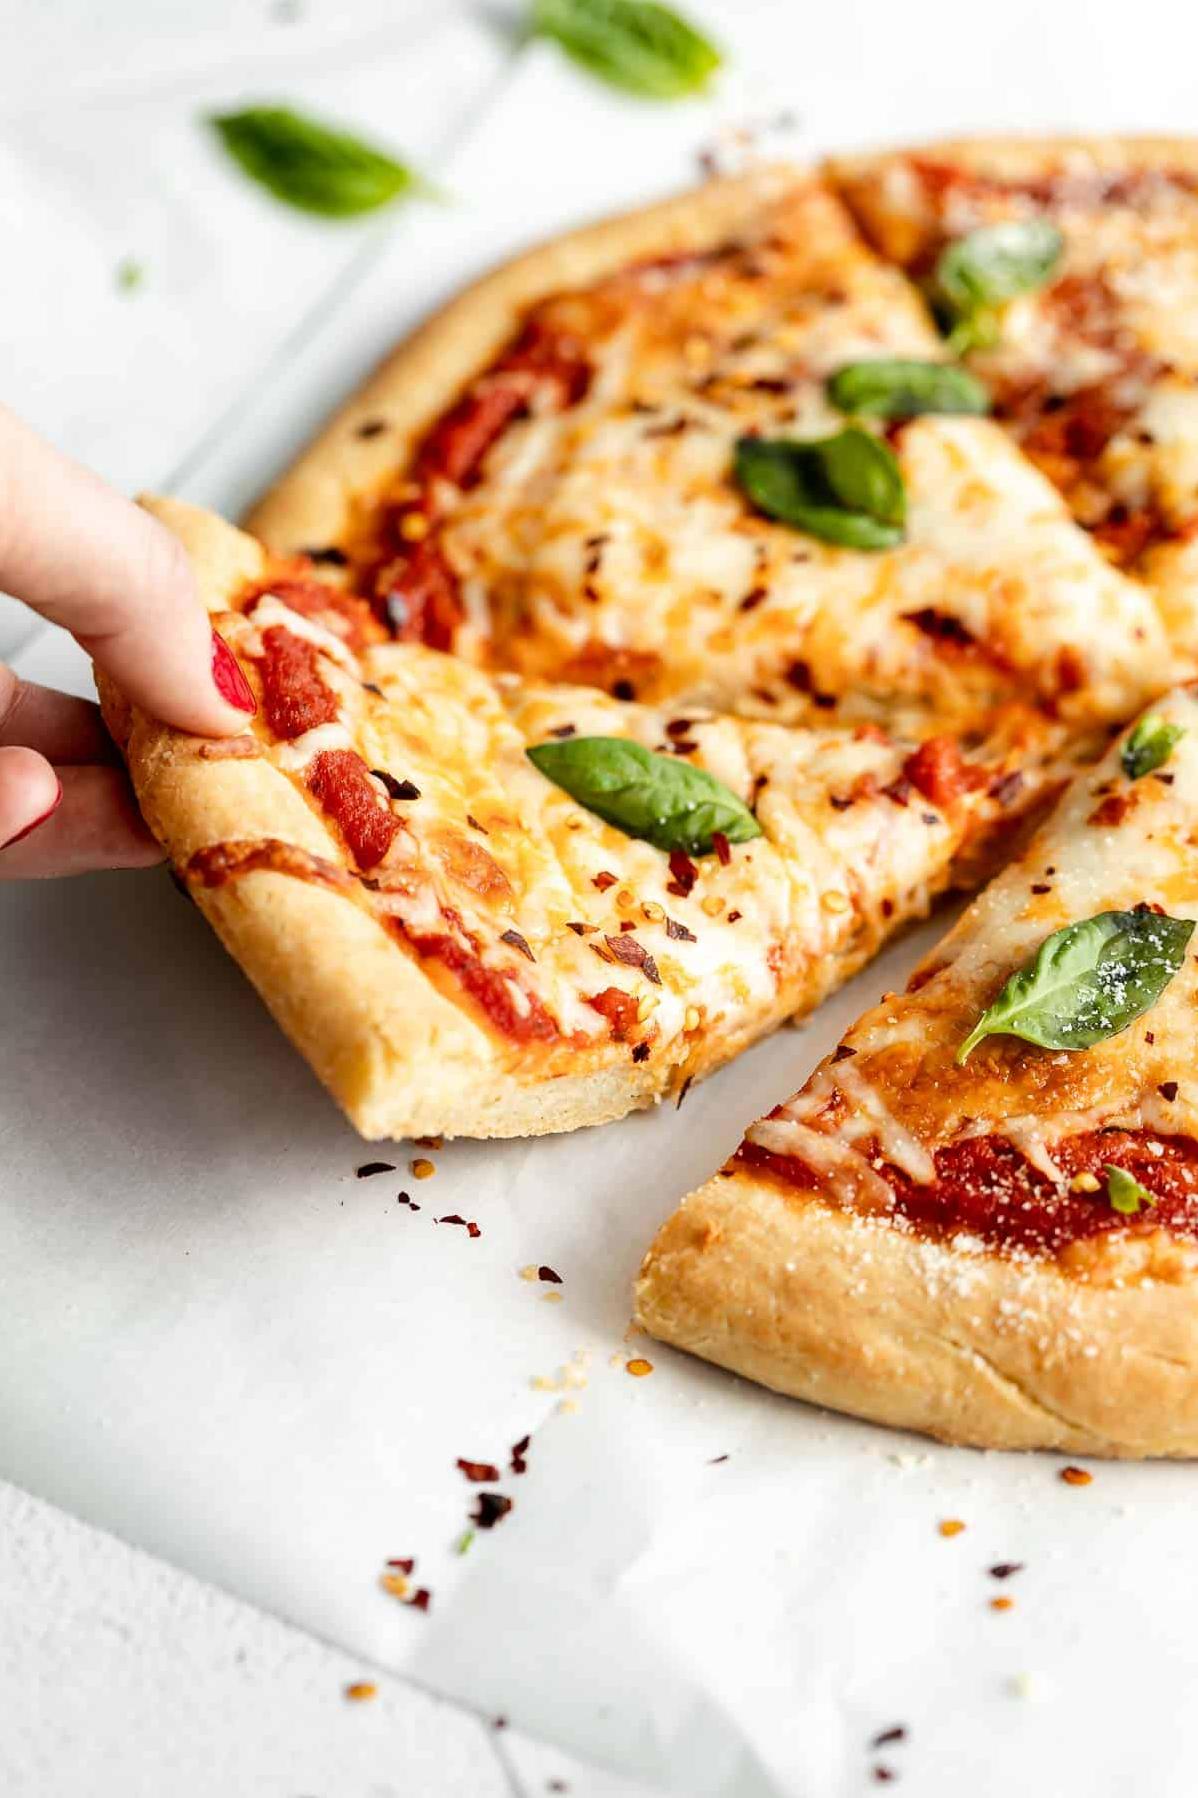  Making gluten-free pizza base has never been easier!